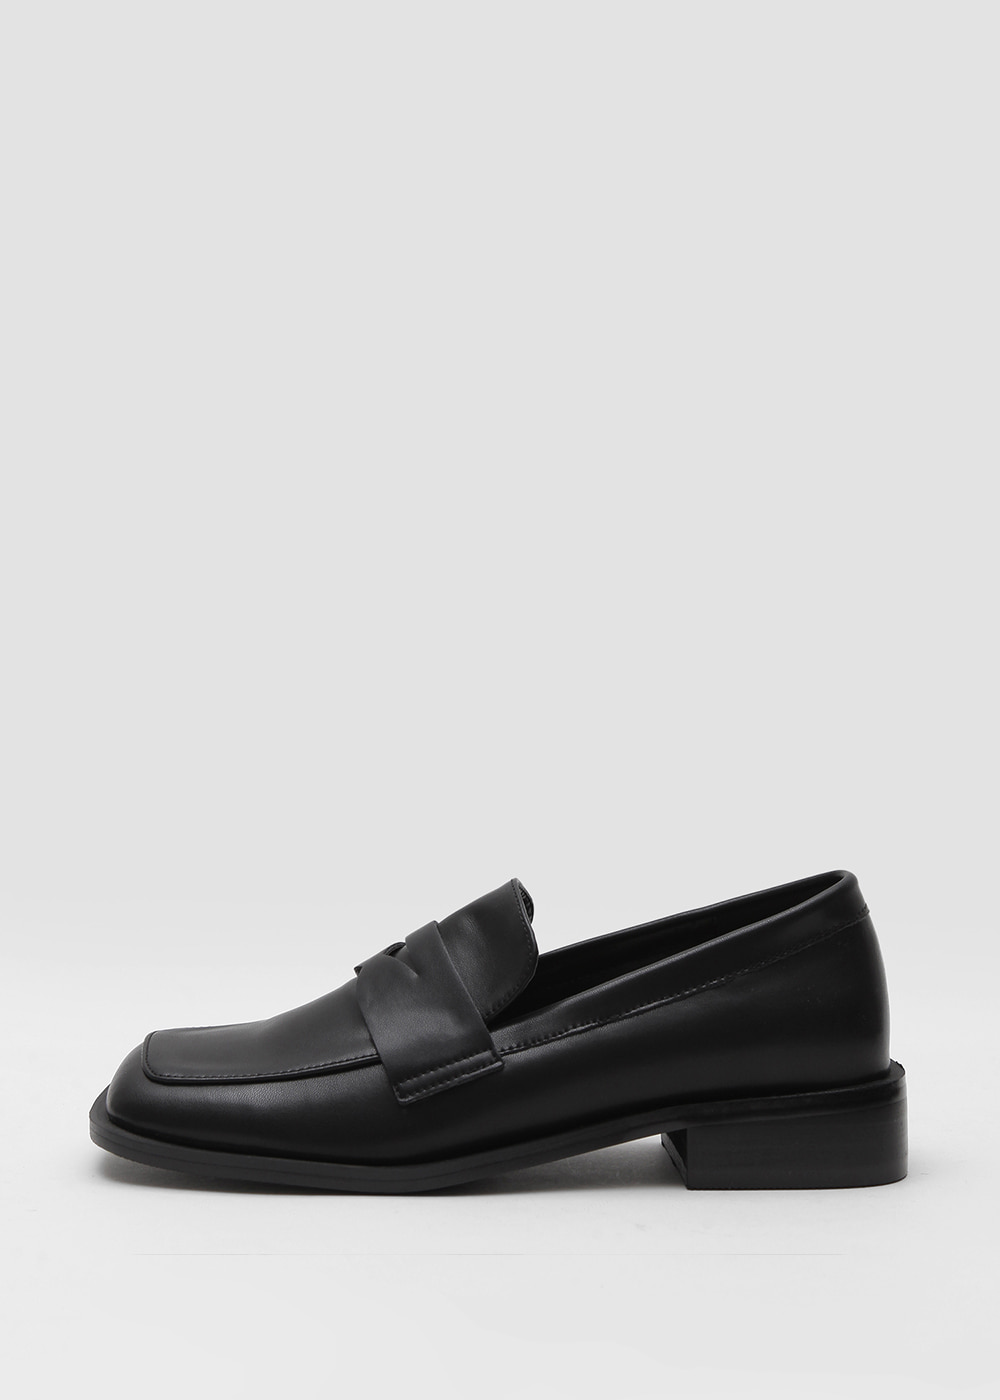 Square penny loafers